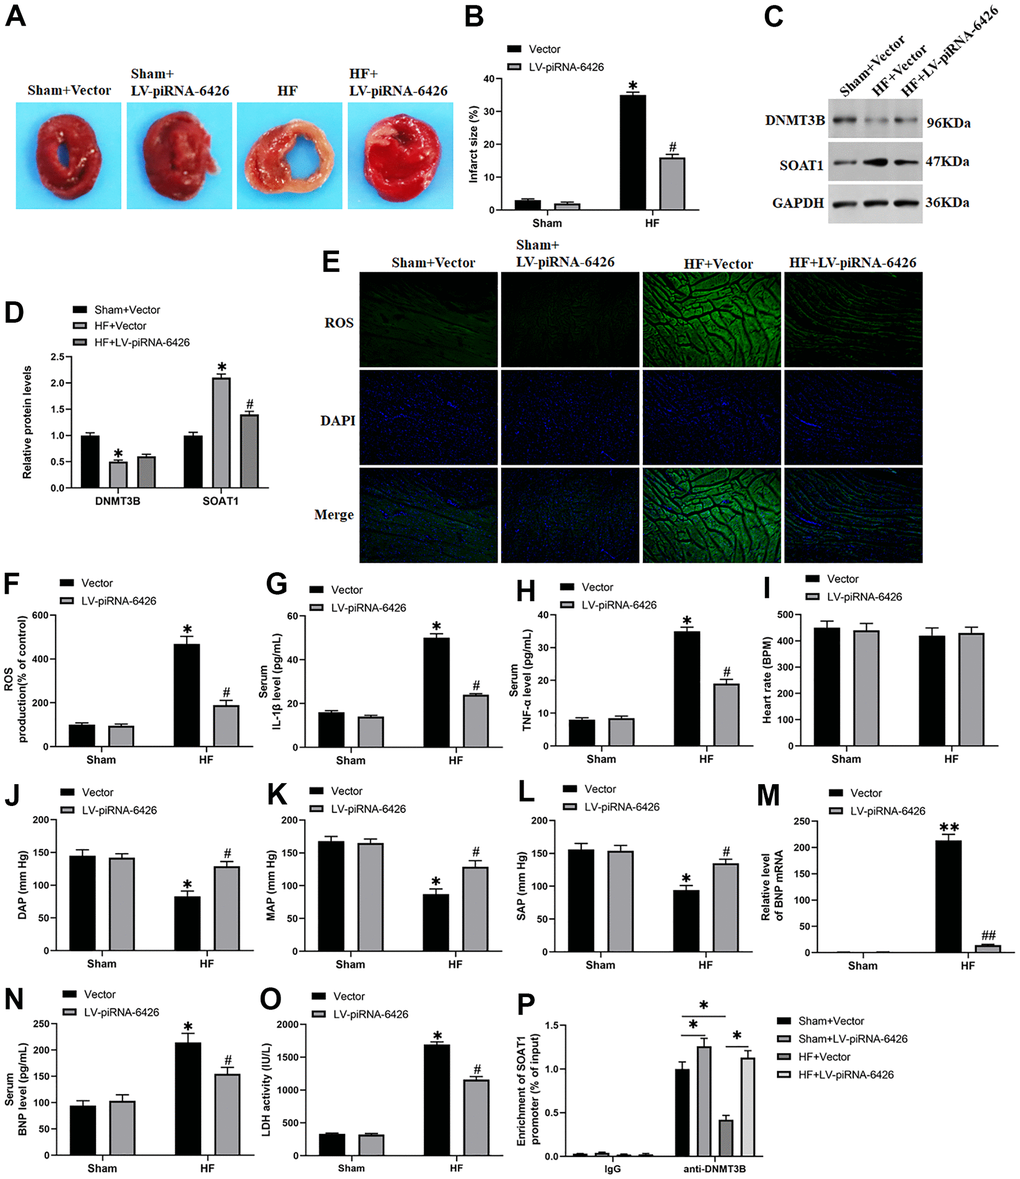 Overexpression of piRNA-6426 improves cardiomyocyte function in rats with heart failure. The coronary artery occlusion valve was used to establish a HF rat model. piRNA-6426 gene was cloned into the lentiviral vector. And 8×105 TU lentivirus were injected into the HF mice. The rats in each group were anesthetized after feeding for 4 weeks for the detection of various indicators. (A, B) TTC staining was used to detect the infarcted area of rat heart. (C, D) Western blotting was used to detect the expression levels of SOAT1 and DNMT3B proteins. (E, F) The production of ROS was analyzed with DCFH-DA. (G, H) ELISA kits were used to detect LDH activity in heart tissue homogenate and the secretion of serum IL-1β content. (I–L) The rats were anesthetized by intraperitoneal injection of ketamine (100 mg/kg) and xylazine (10 mg/kg), and then placed on XR900 non-invasive blood pressure monitor (Xinruan, Shanghai, China) to monitor and record the heart rate, diastolic arterial pressure (DAP), mean arterial pressure (MAP) and systolic arterial pressure (SAP). (M) RT-qPCR was used to detect the BNP mRNA level in mouse serum. (N, O) ELISA kits were used to detect the secretion of serum TNF-α and BNP levels. (P) The change of DNMT3B bind to the promoter of SOAT1 by chromatin immuno-precipitation (ChIP) method. Values were expressed as mean ± SEM. $ P>0.05, *P0.05, #P